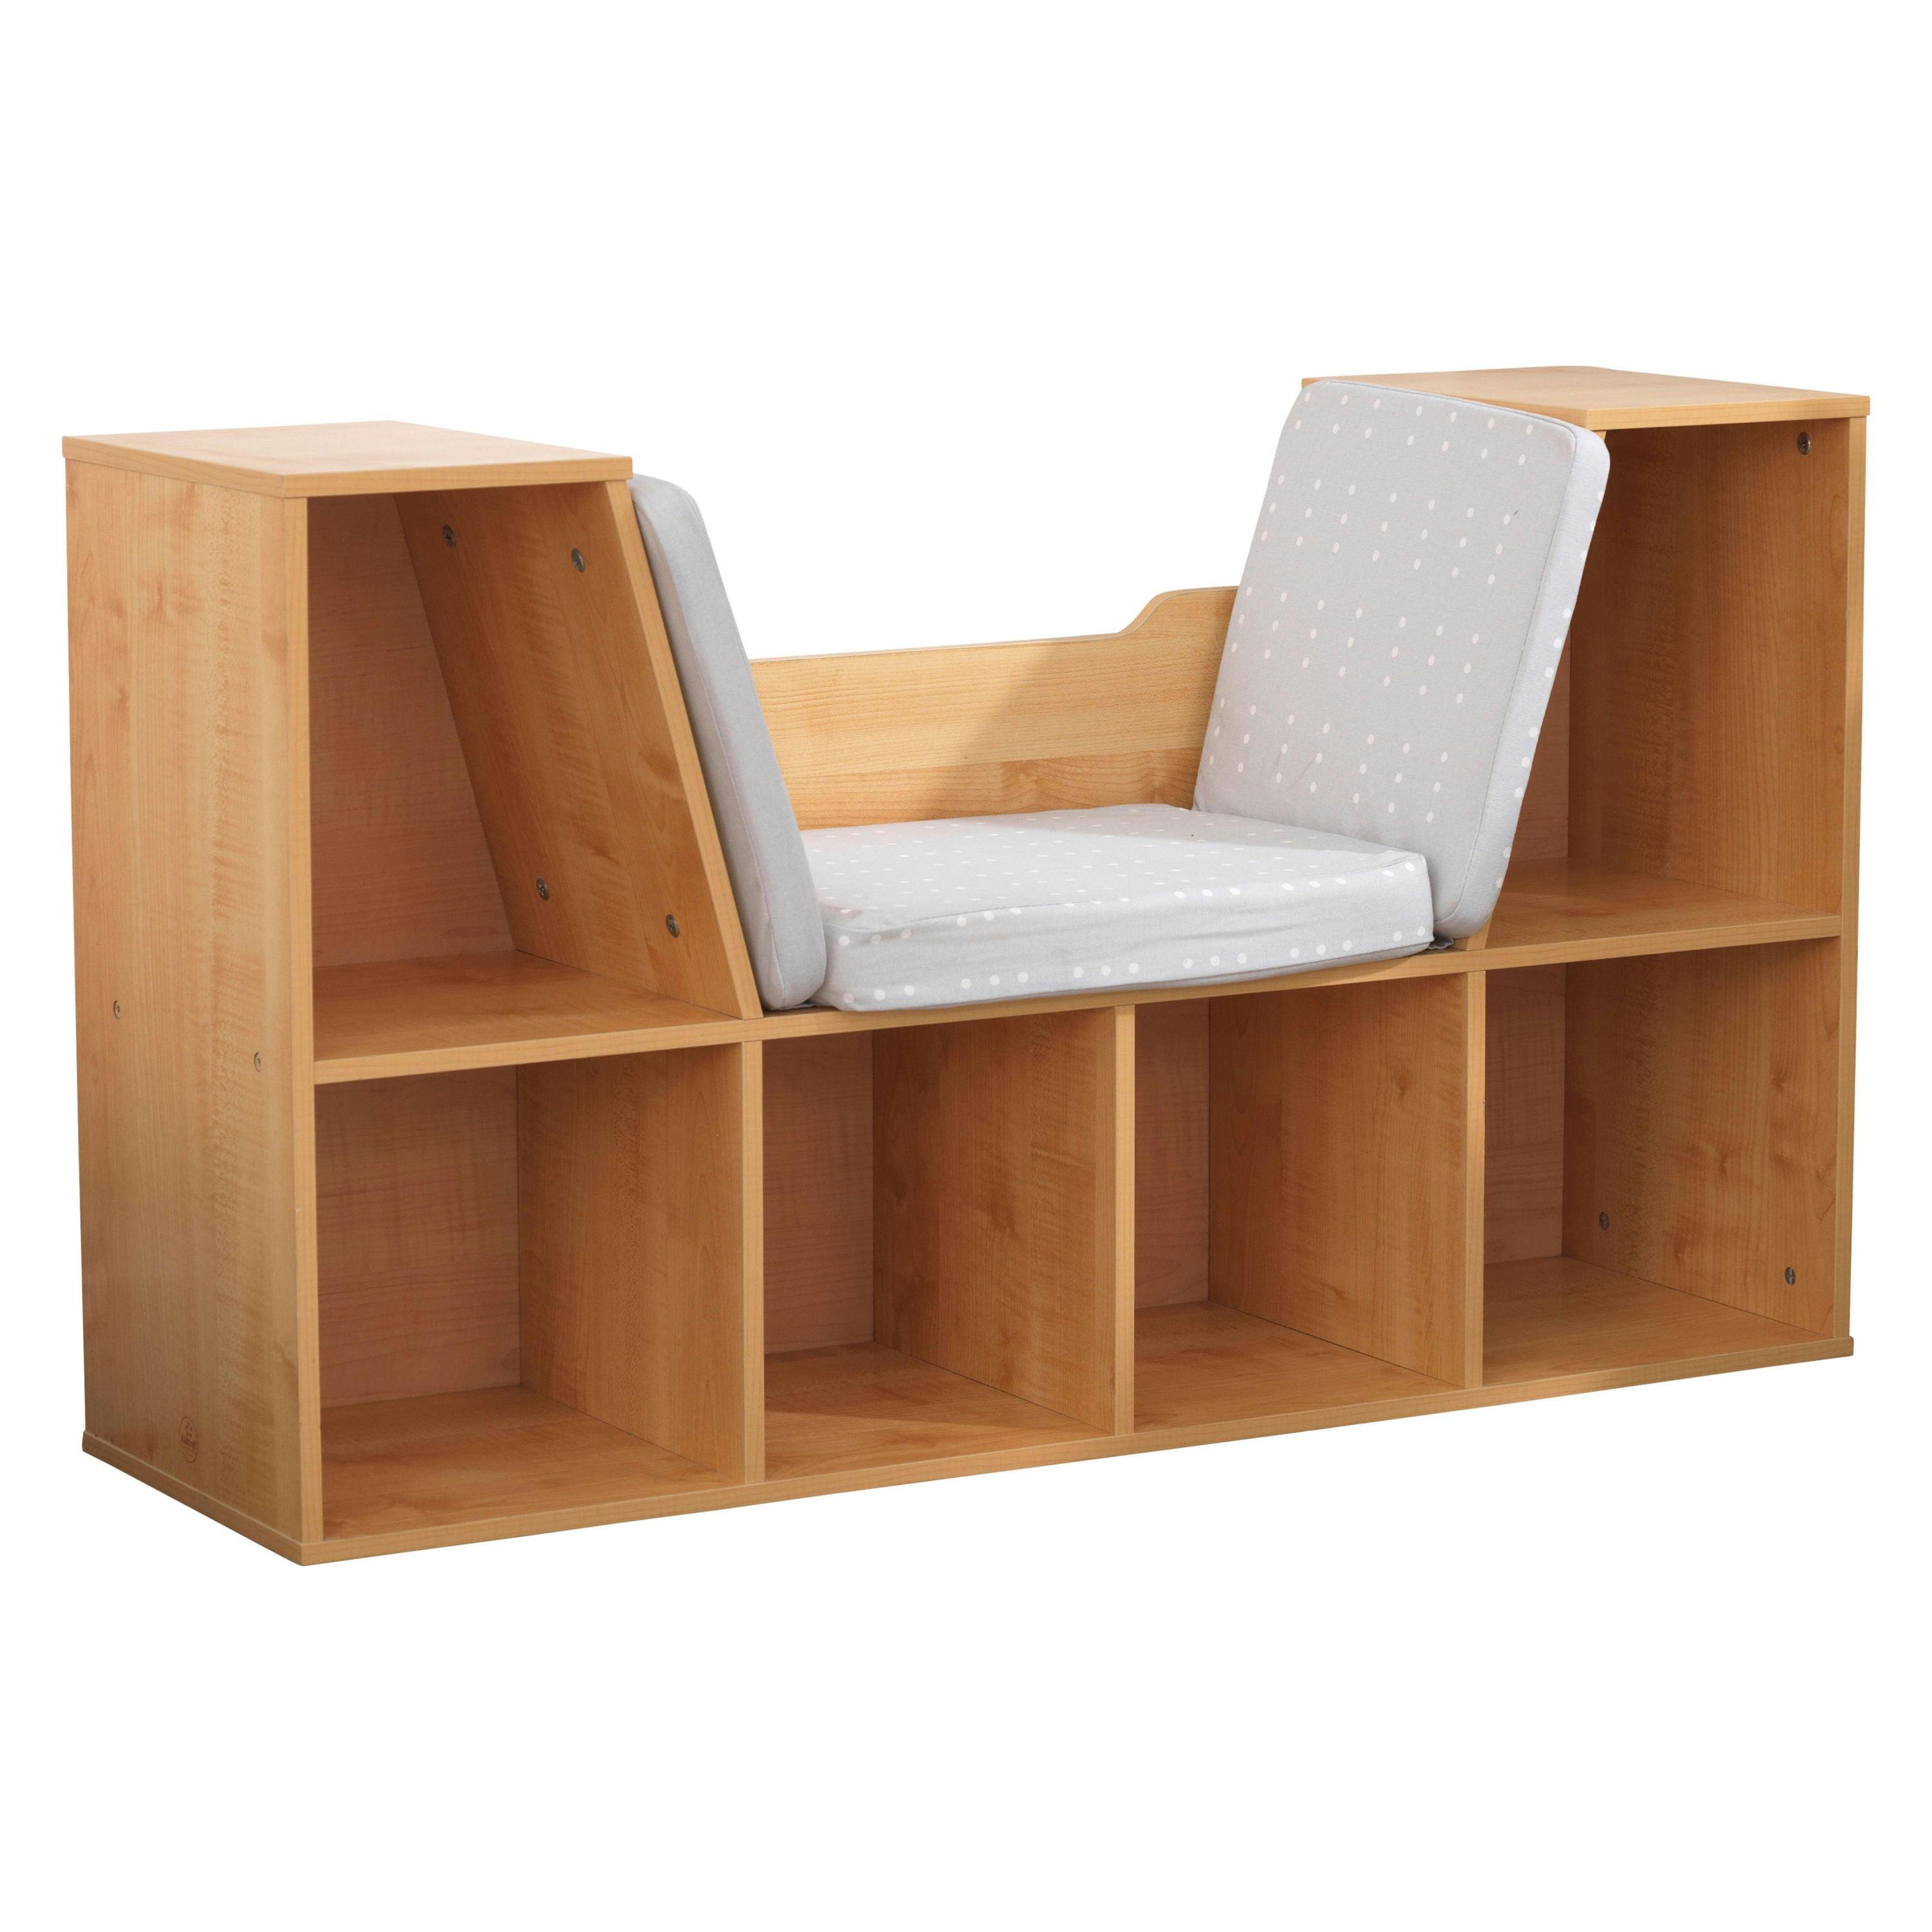 Cozy Corner Natural Wooden Bookcase with Cushioned Reading Nook